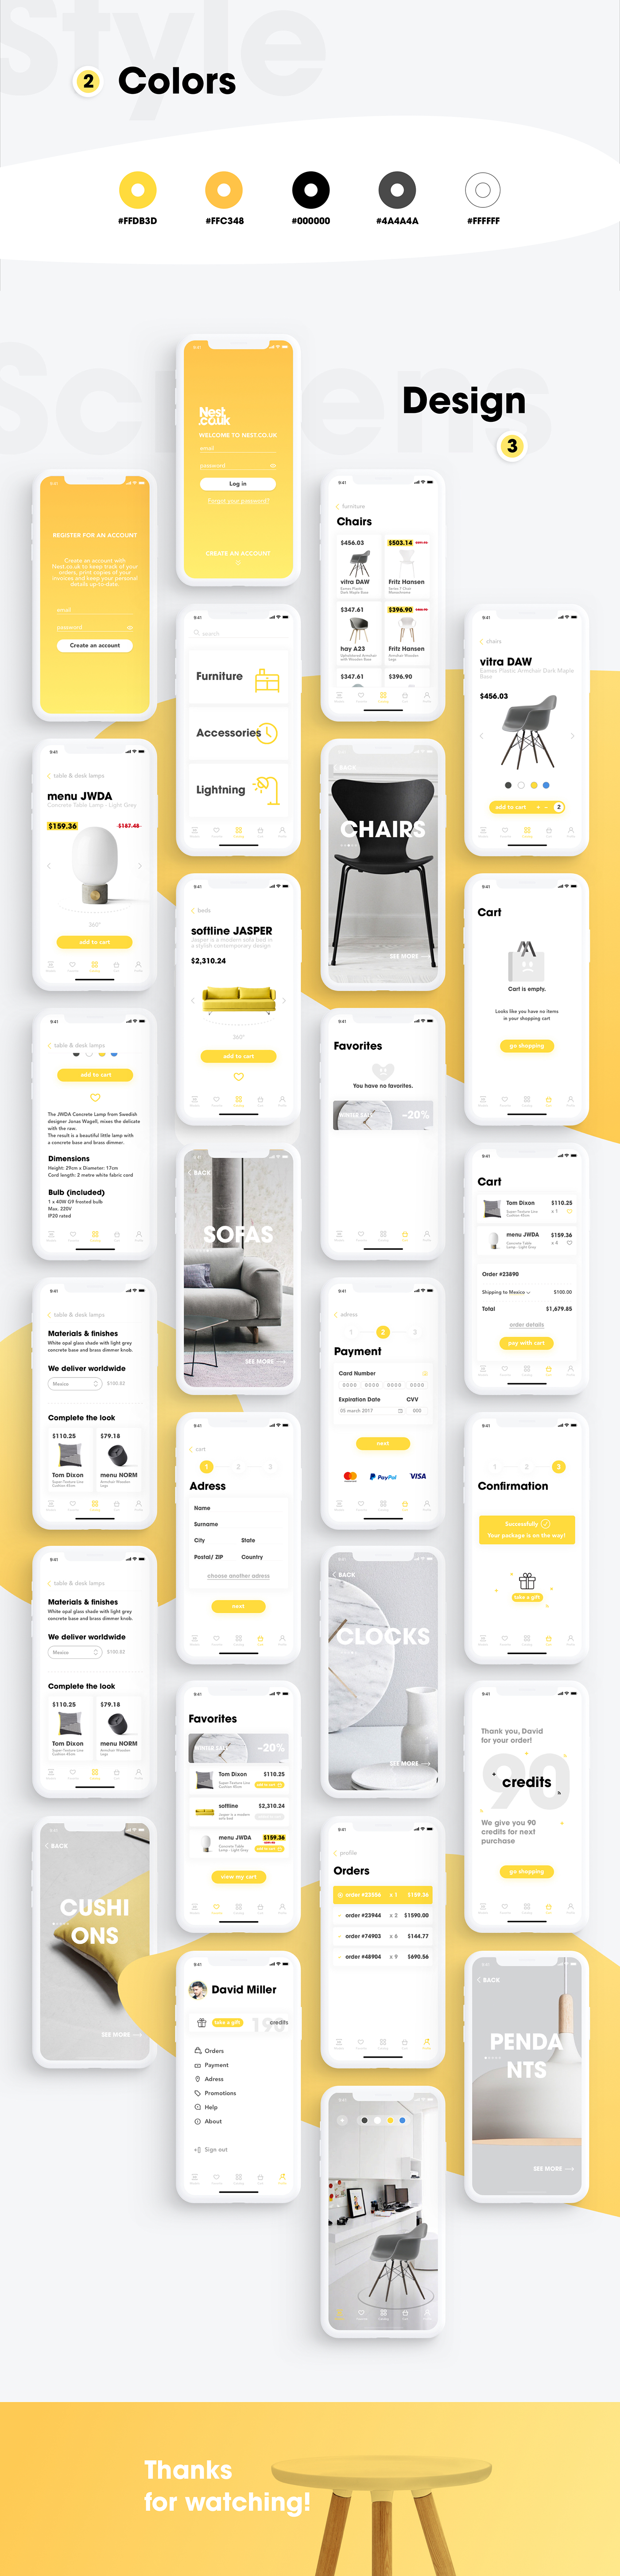 ios UI ux store mobile app interaction Interface nest iPhone x